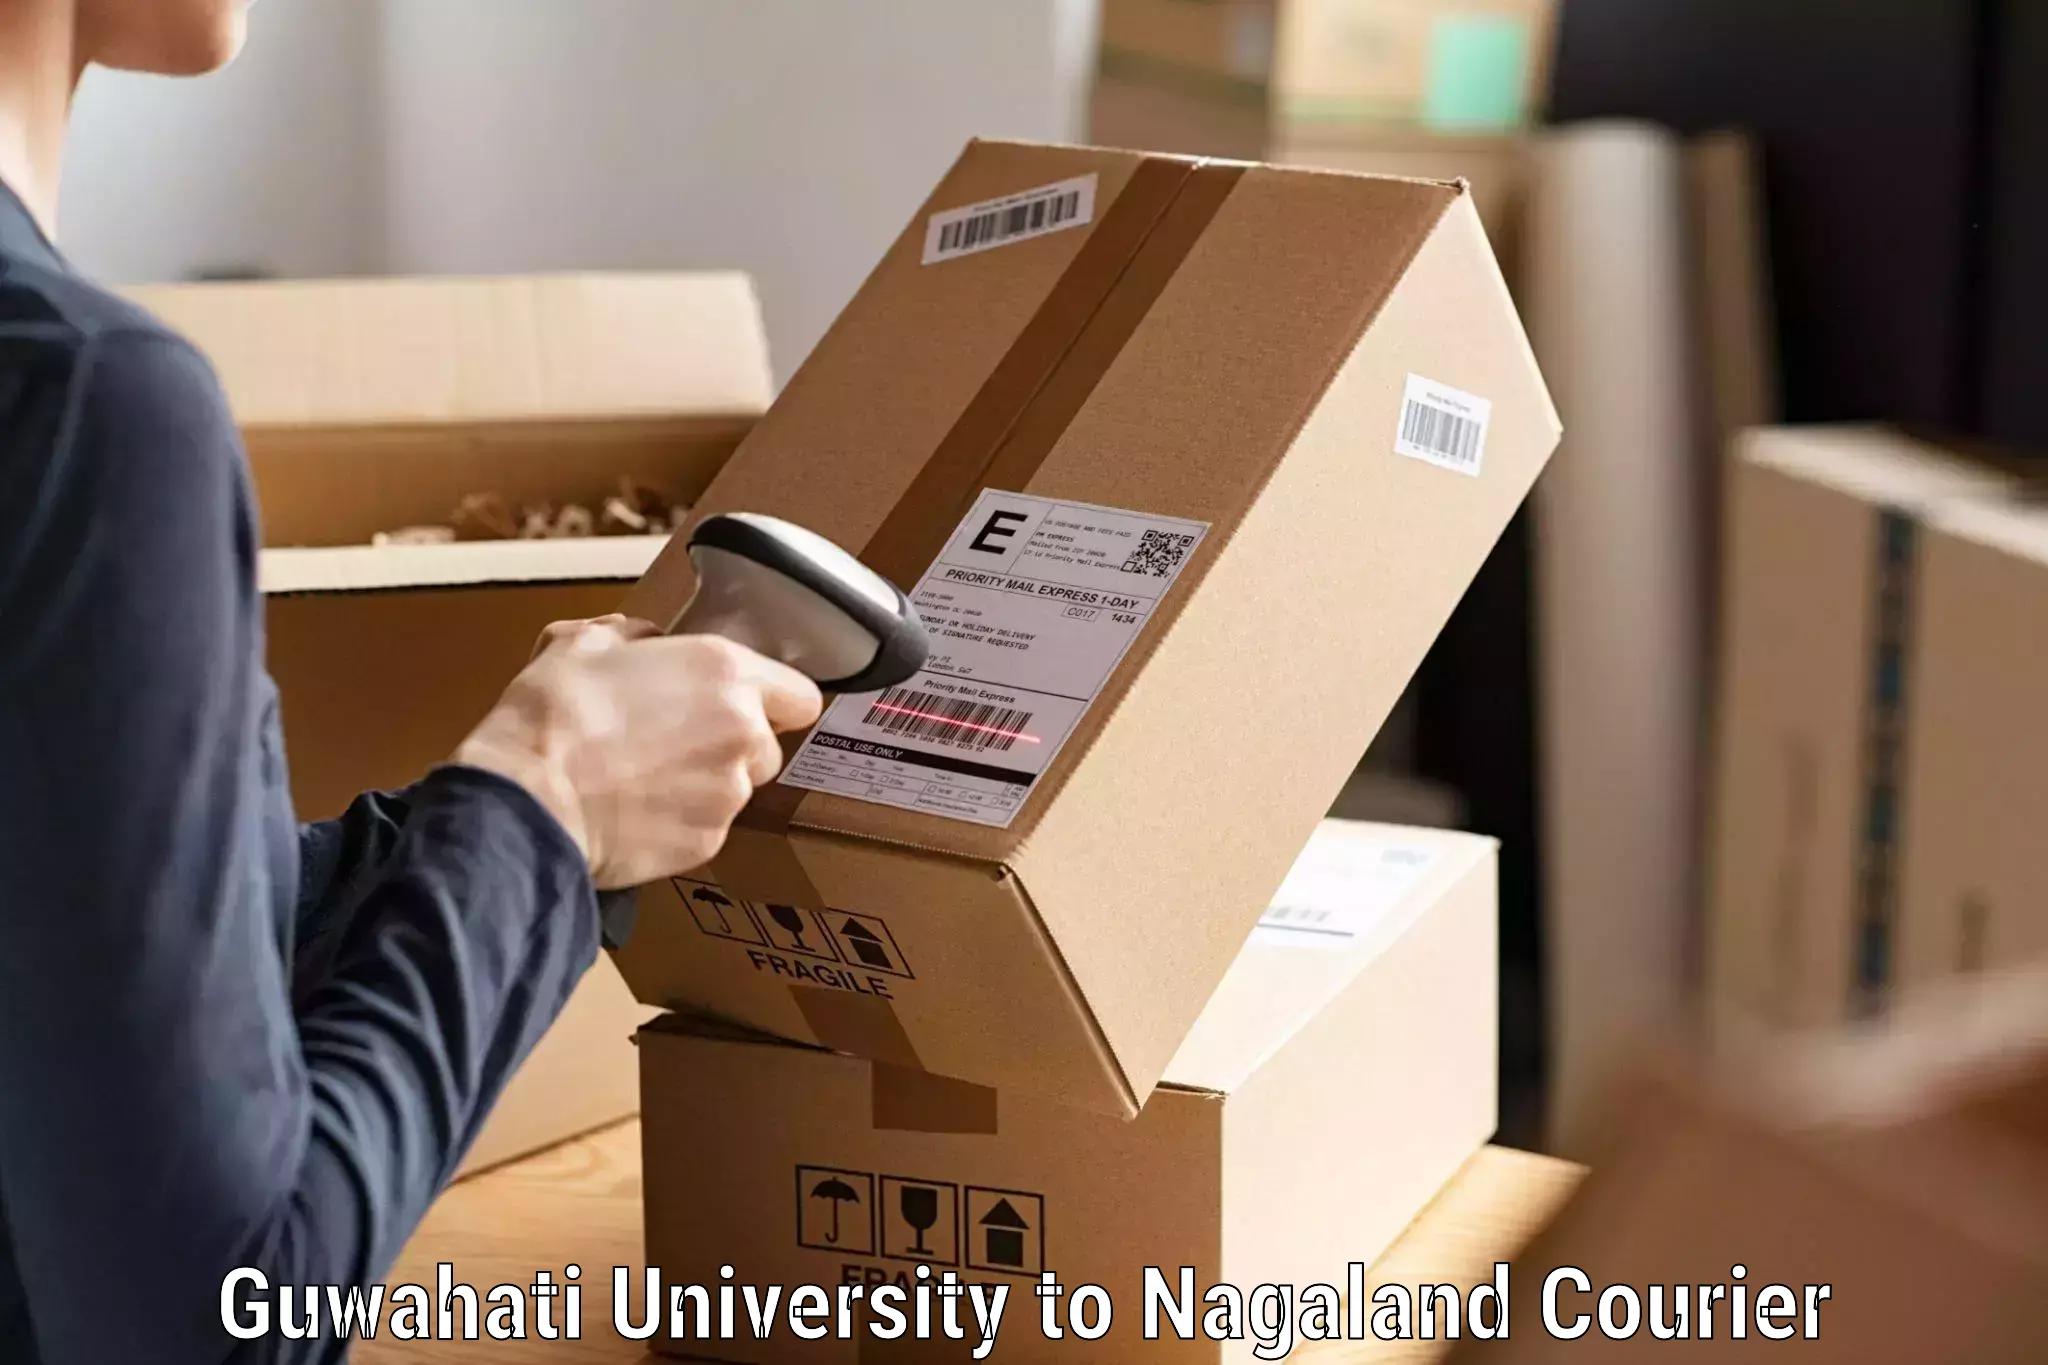 Secure package delivery Guwahati University to Kohima